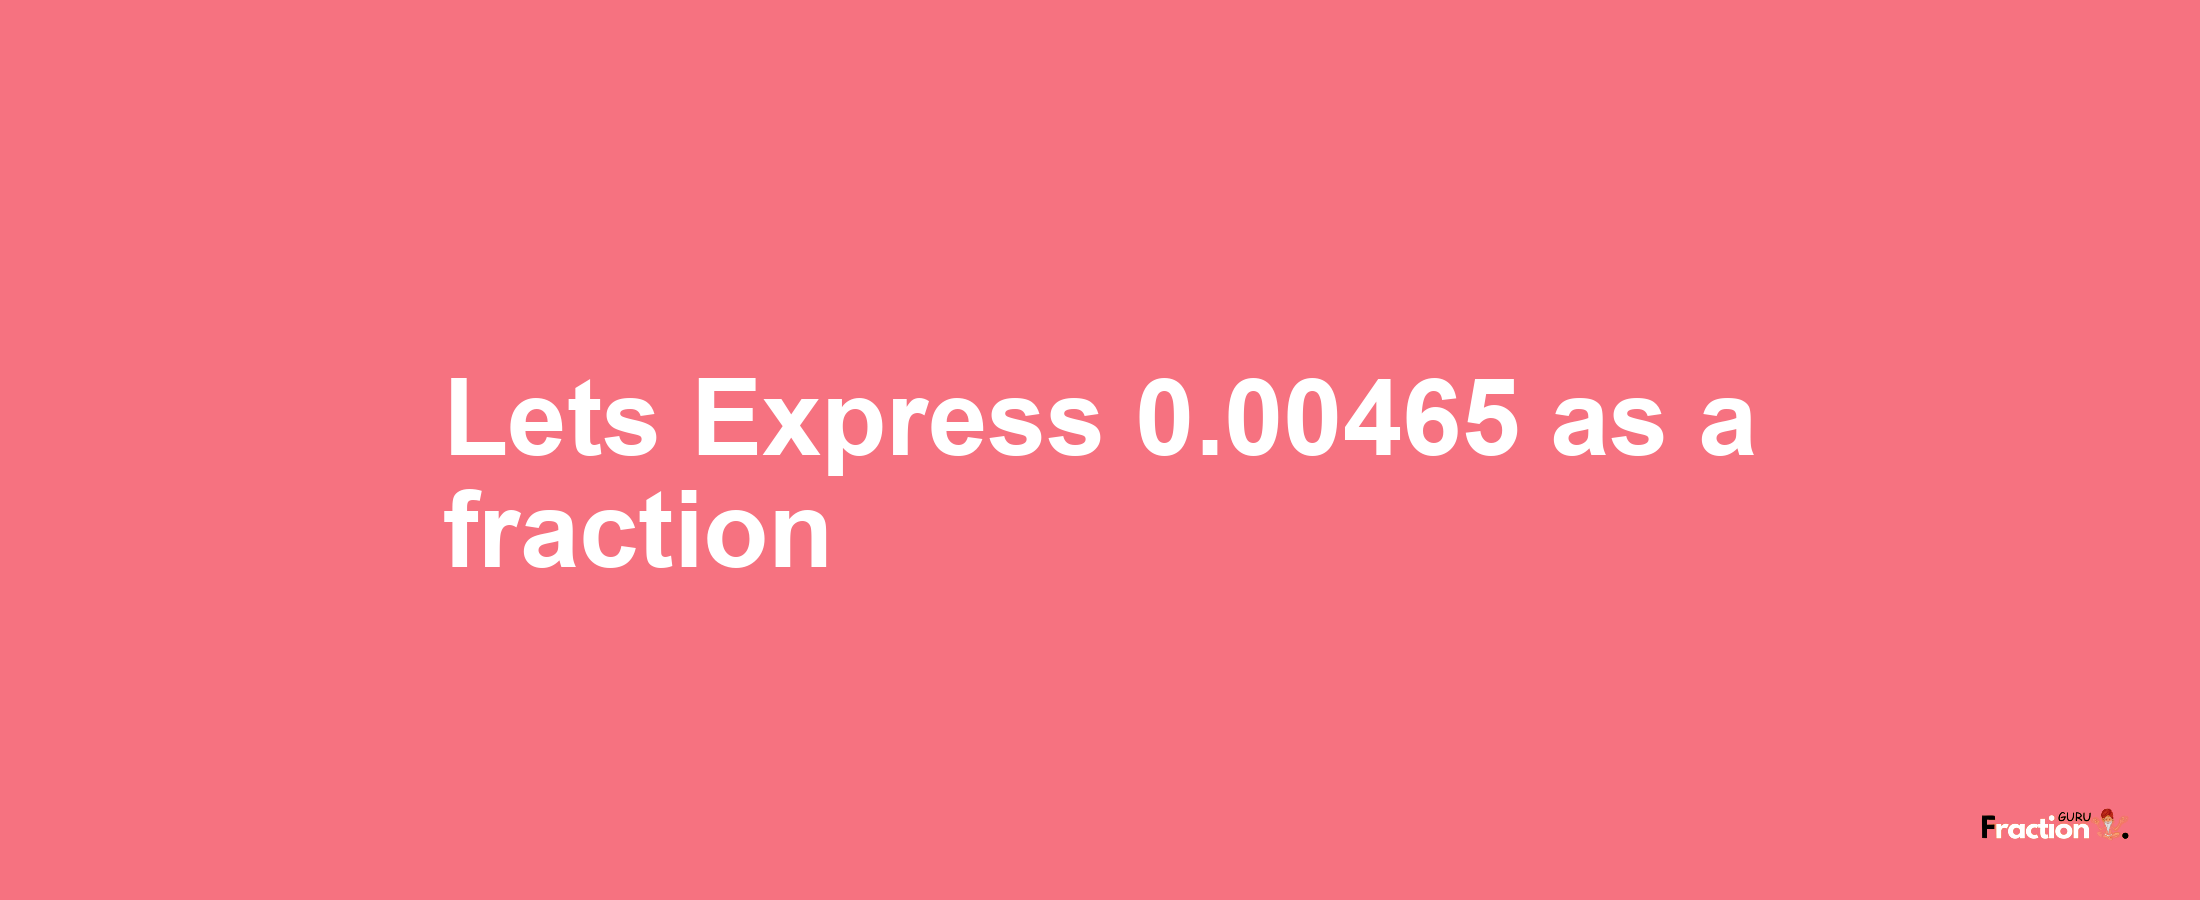 Lets Express 0.00465 as afraction